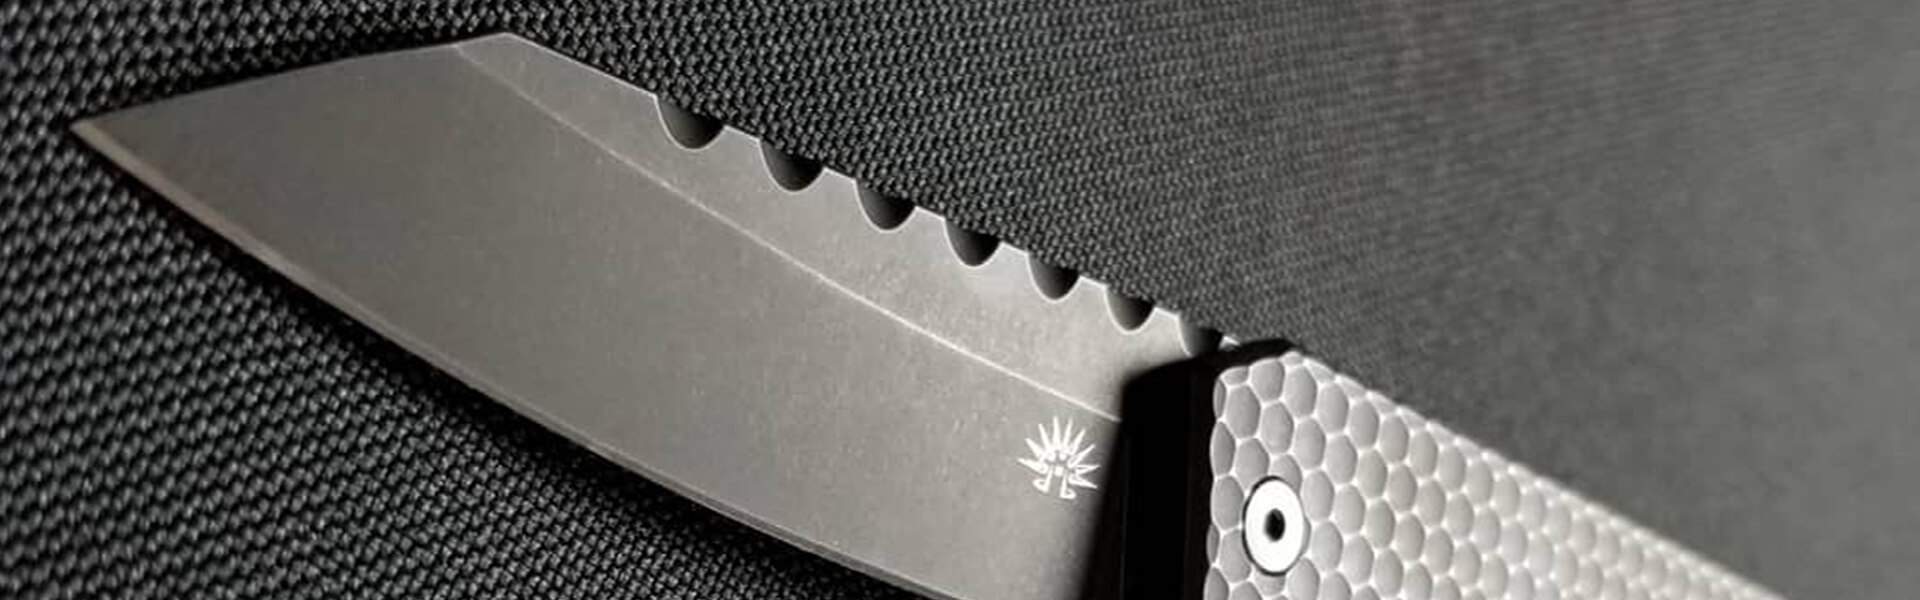 How to Put a Razor Edge on Your Knife